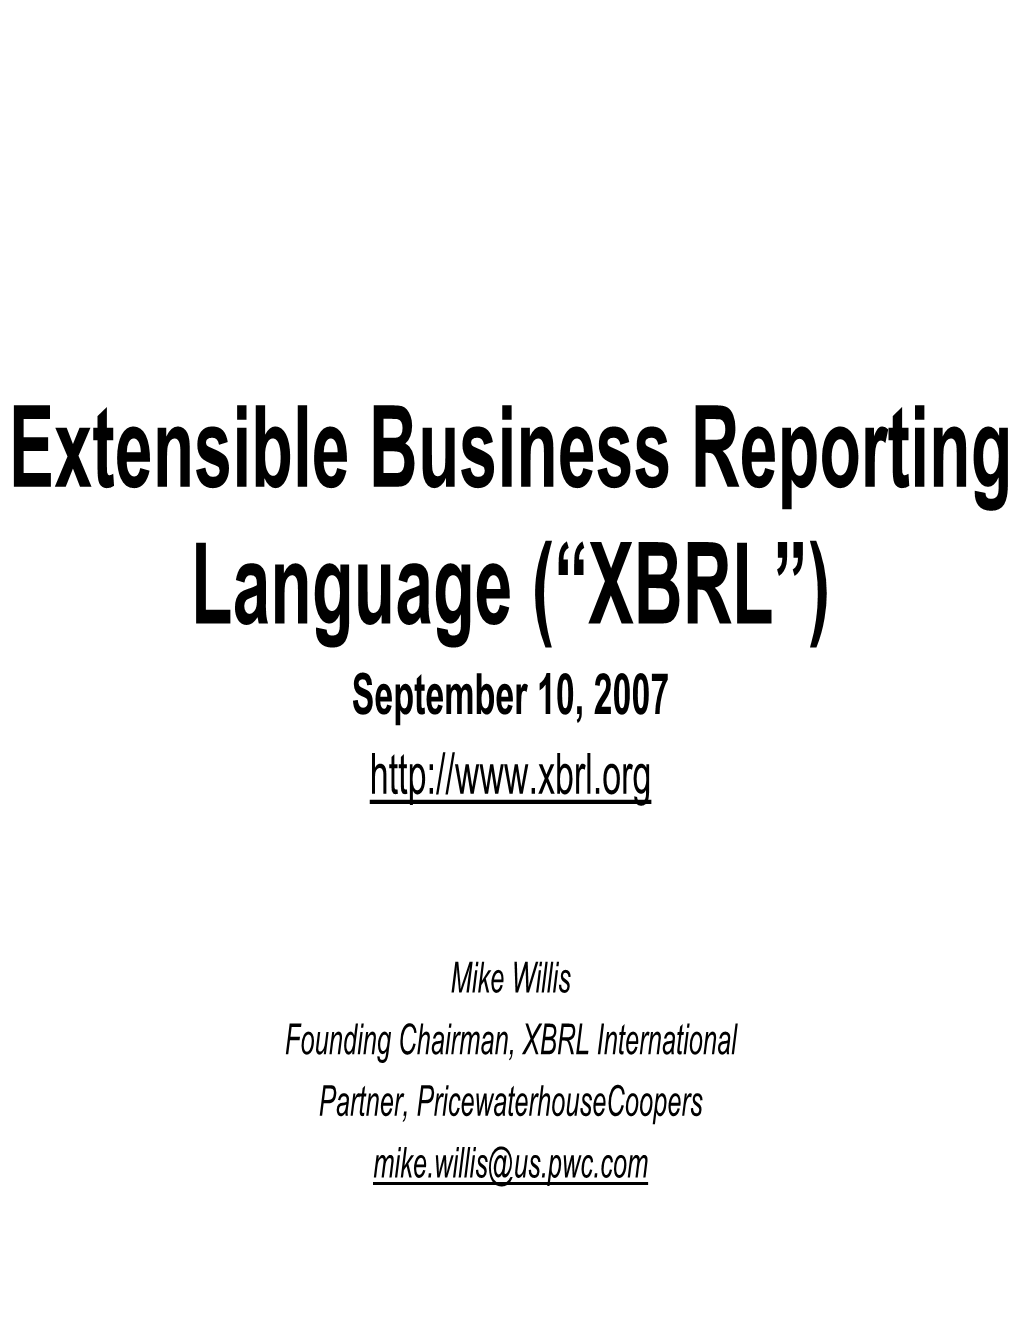 Extensible Business Reporting Language (“XBRL”) September 10, 2007